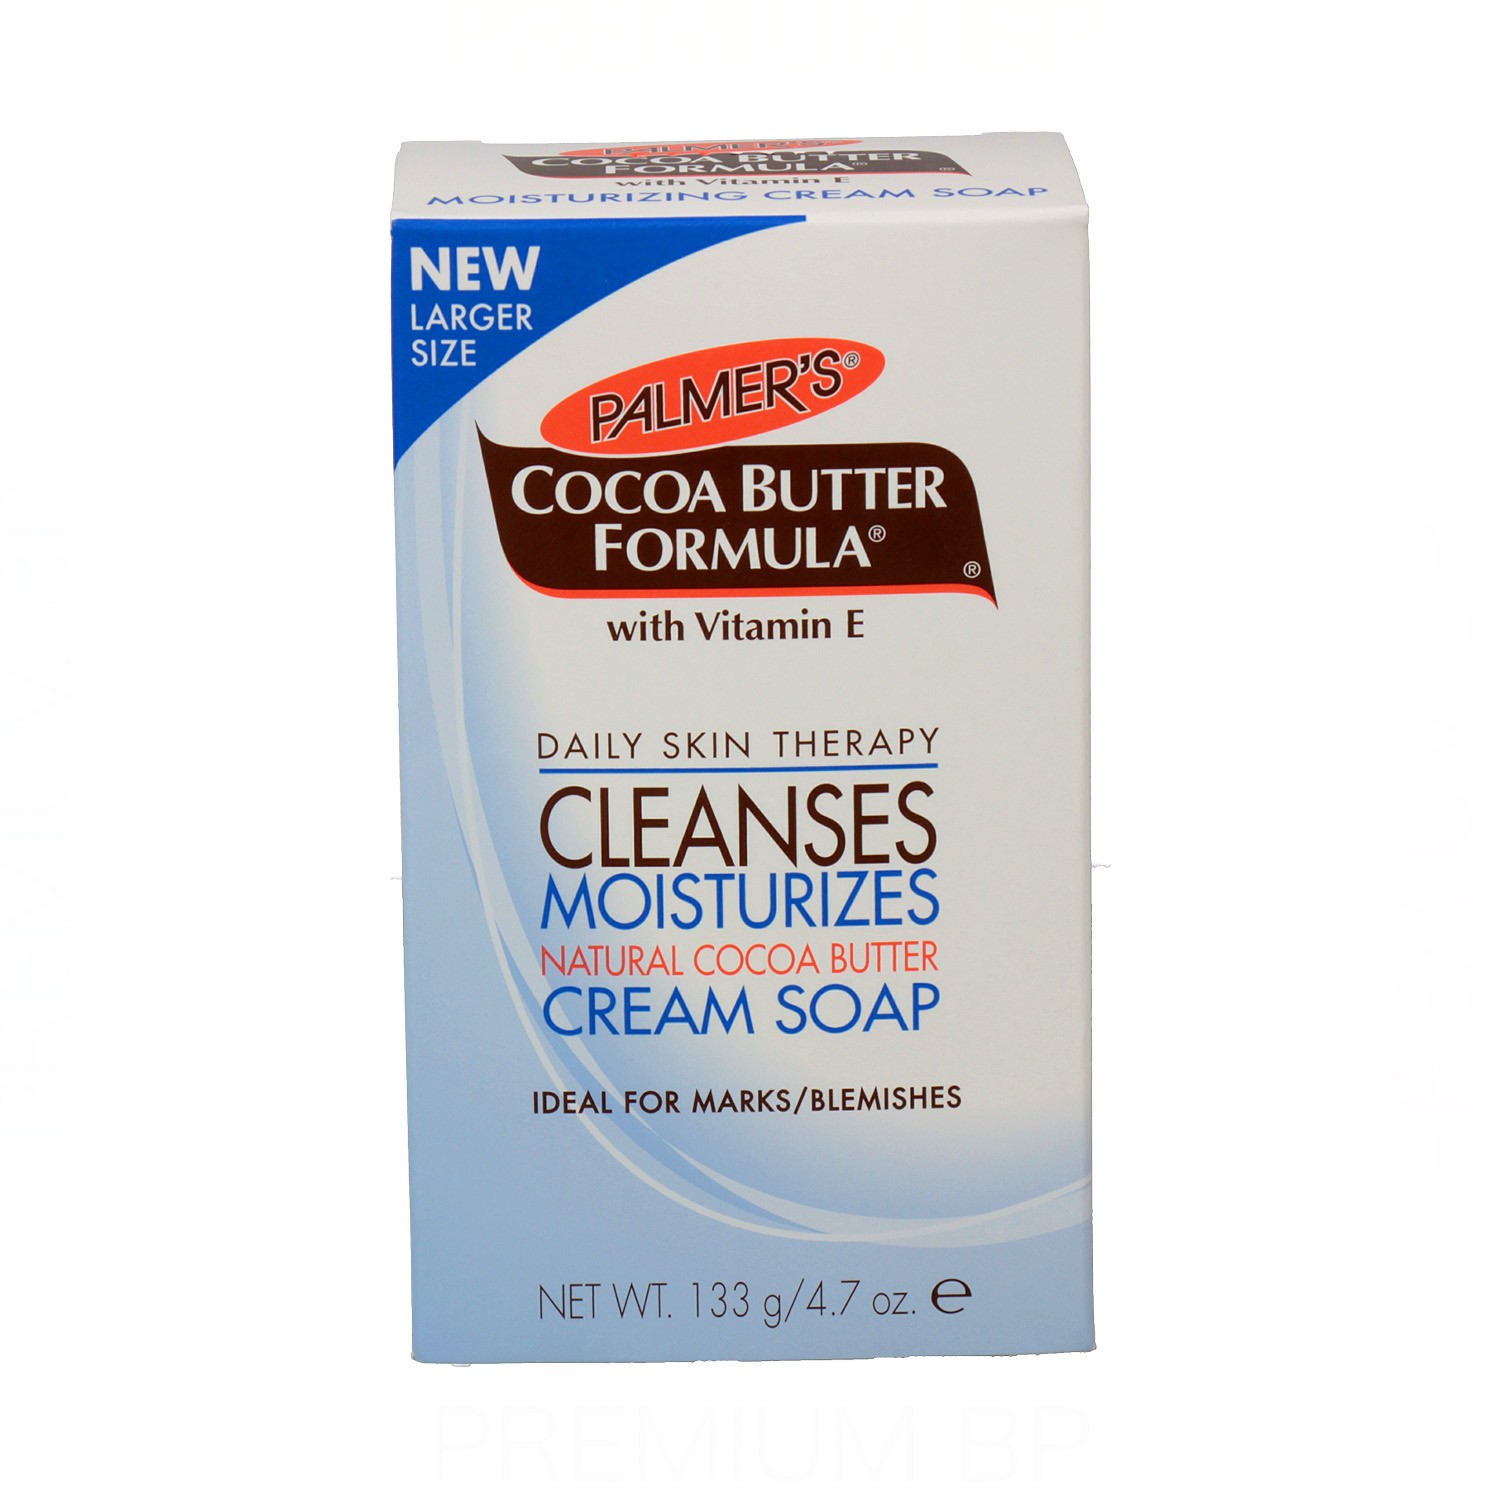 Palmers Cocoa Butter Formule Bar Soap100g